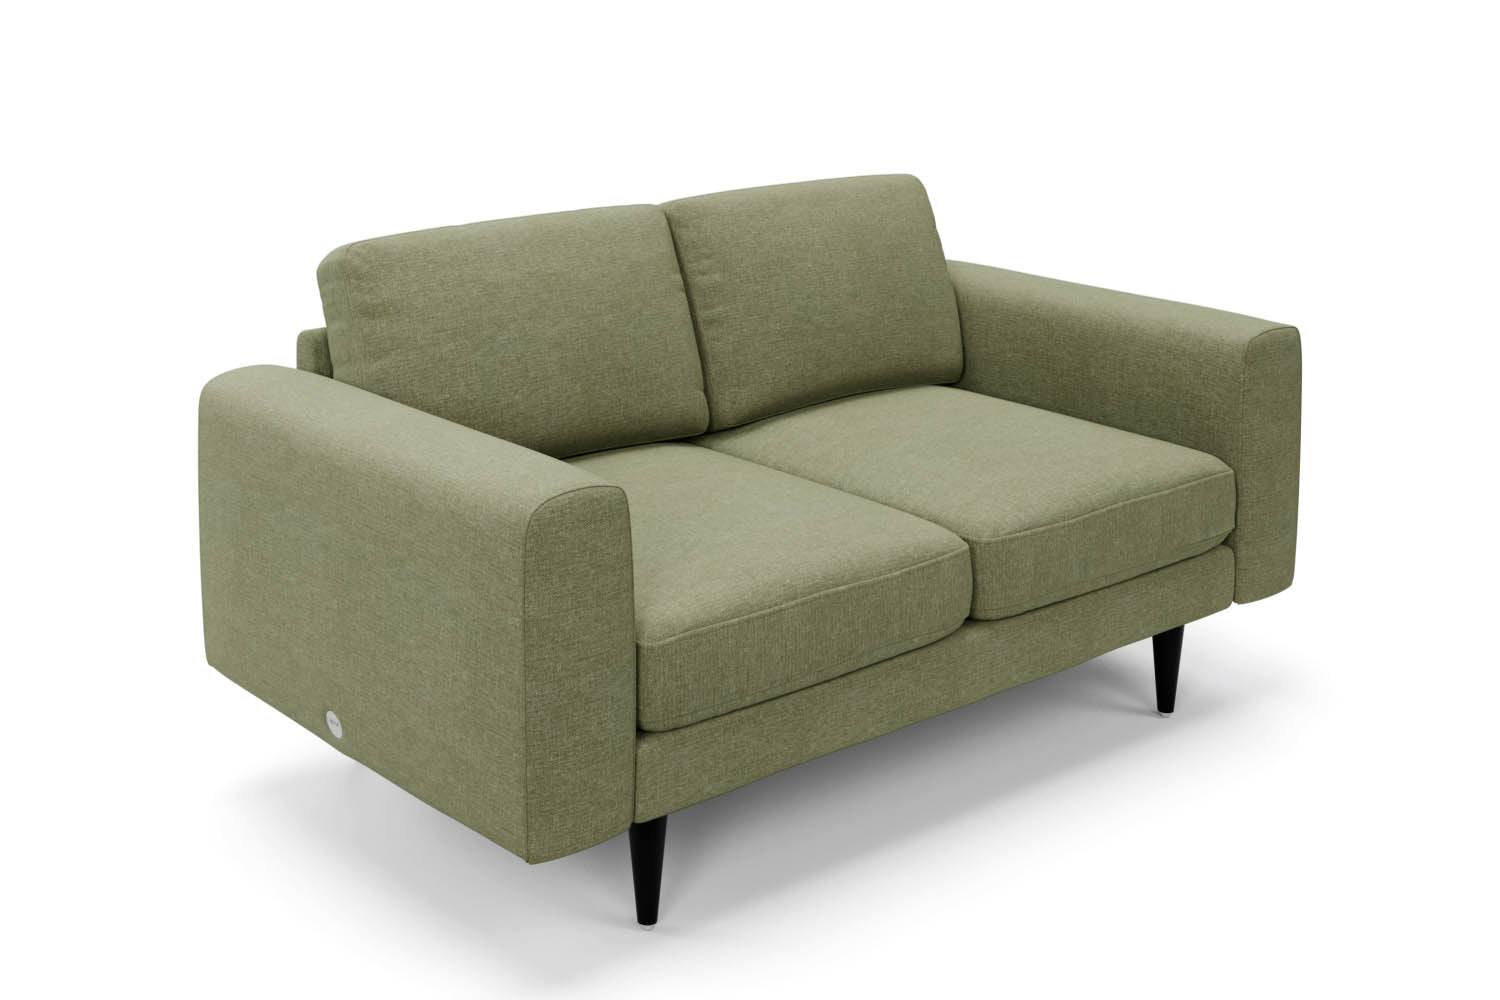 The Big Chill 2 Seater Sofa in Sage Chenille with black legs